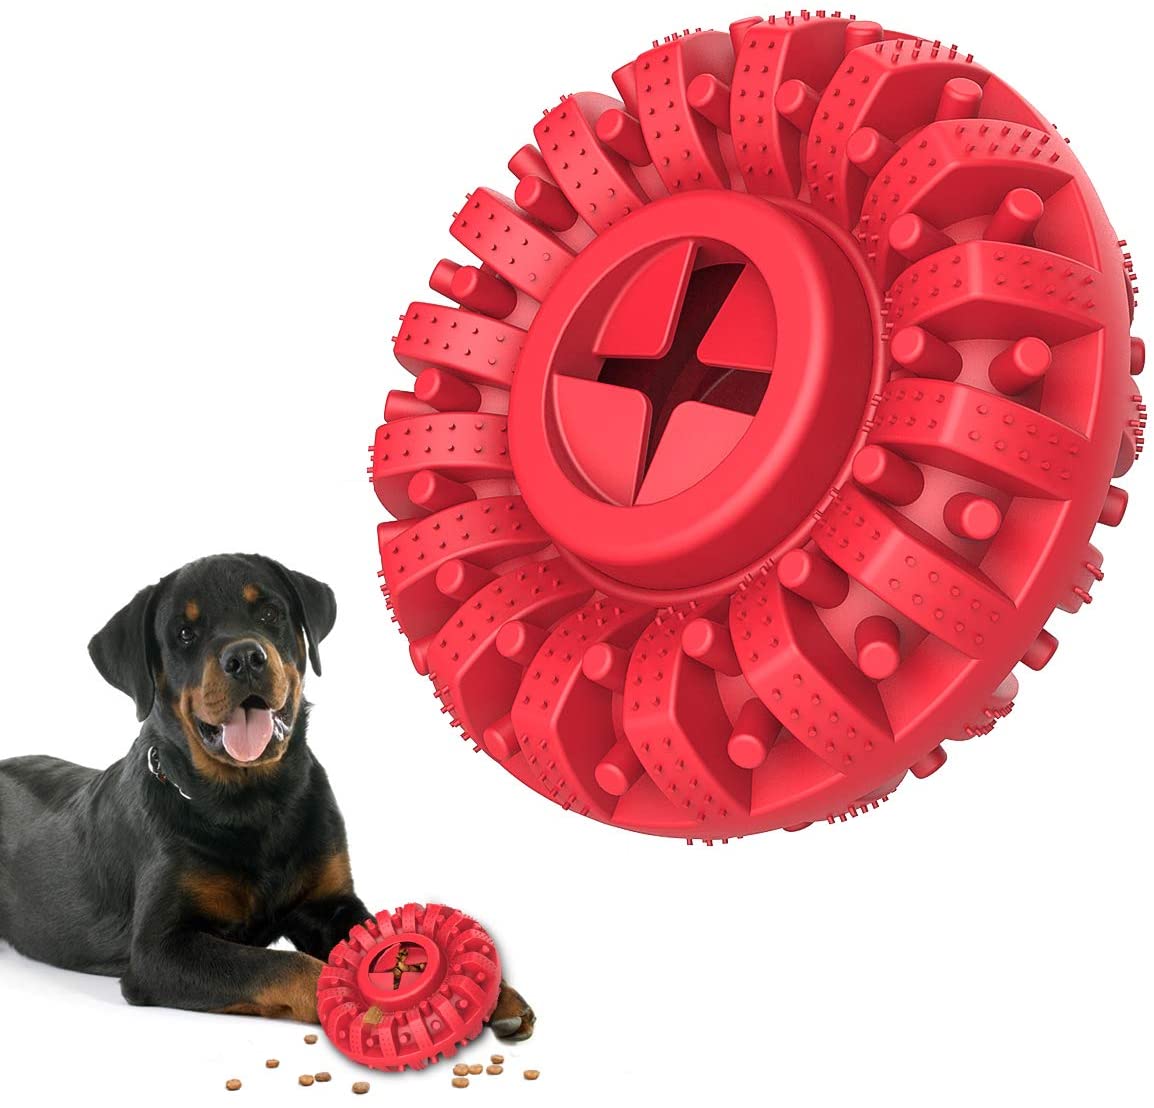 Lewondr Dog Chew Toys for Aggressive Chewers,Durable Natural Rubber Indestructible Dog Toys Treat Dispenser for Power Chewers, Chew Toy for Medium and Large...